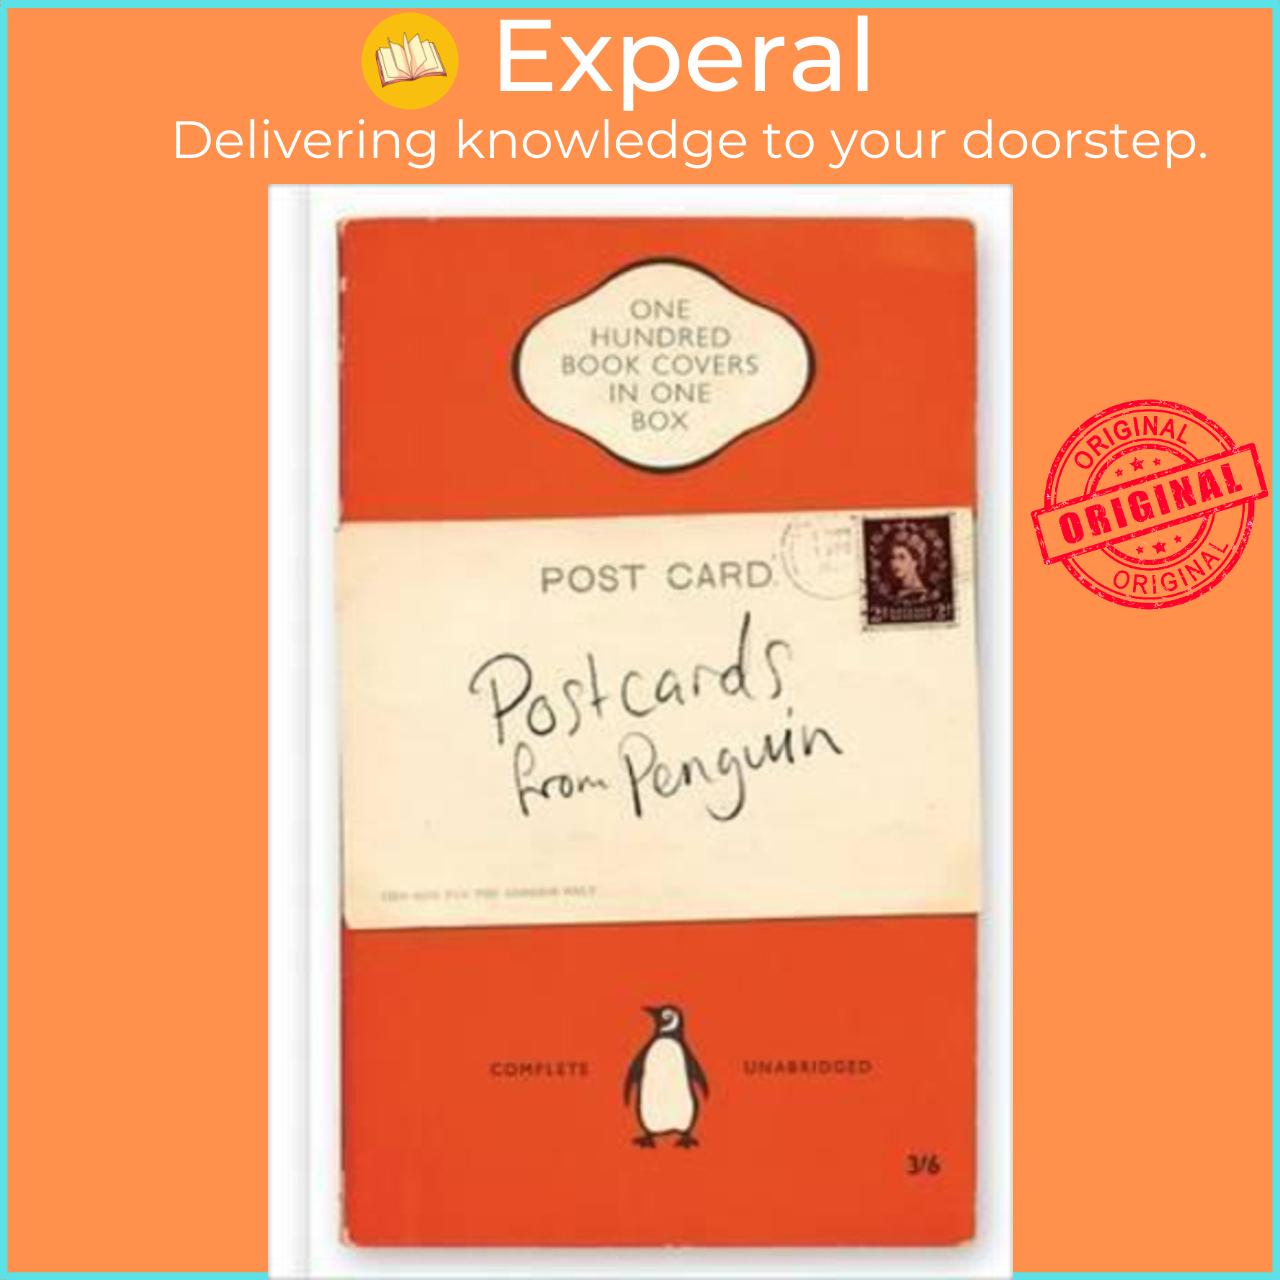 Sách - Postcards From Penguin : 100 Book Jackets in One Box by Penguin (UK edition, hardcover)